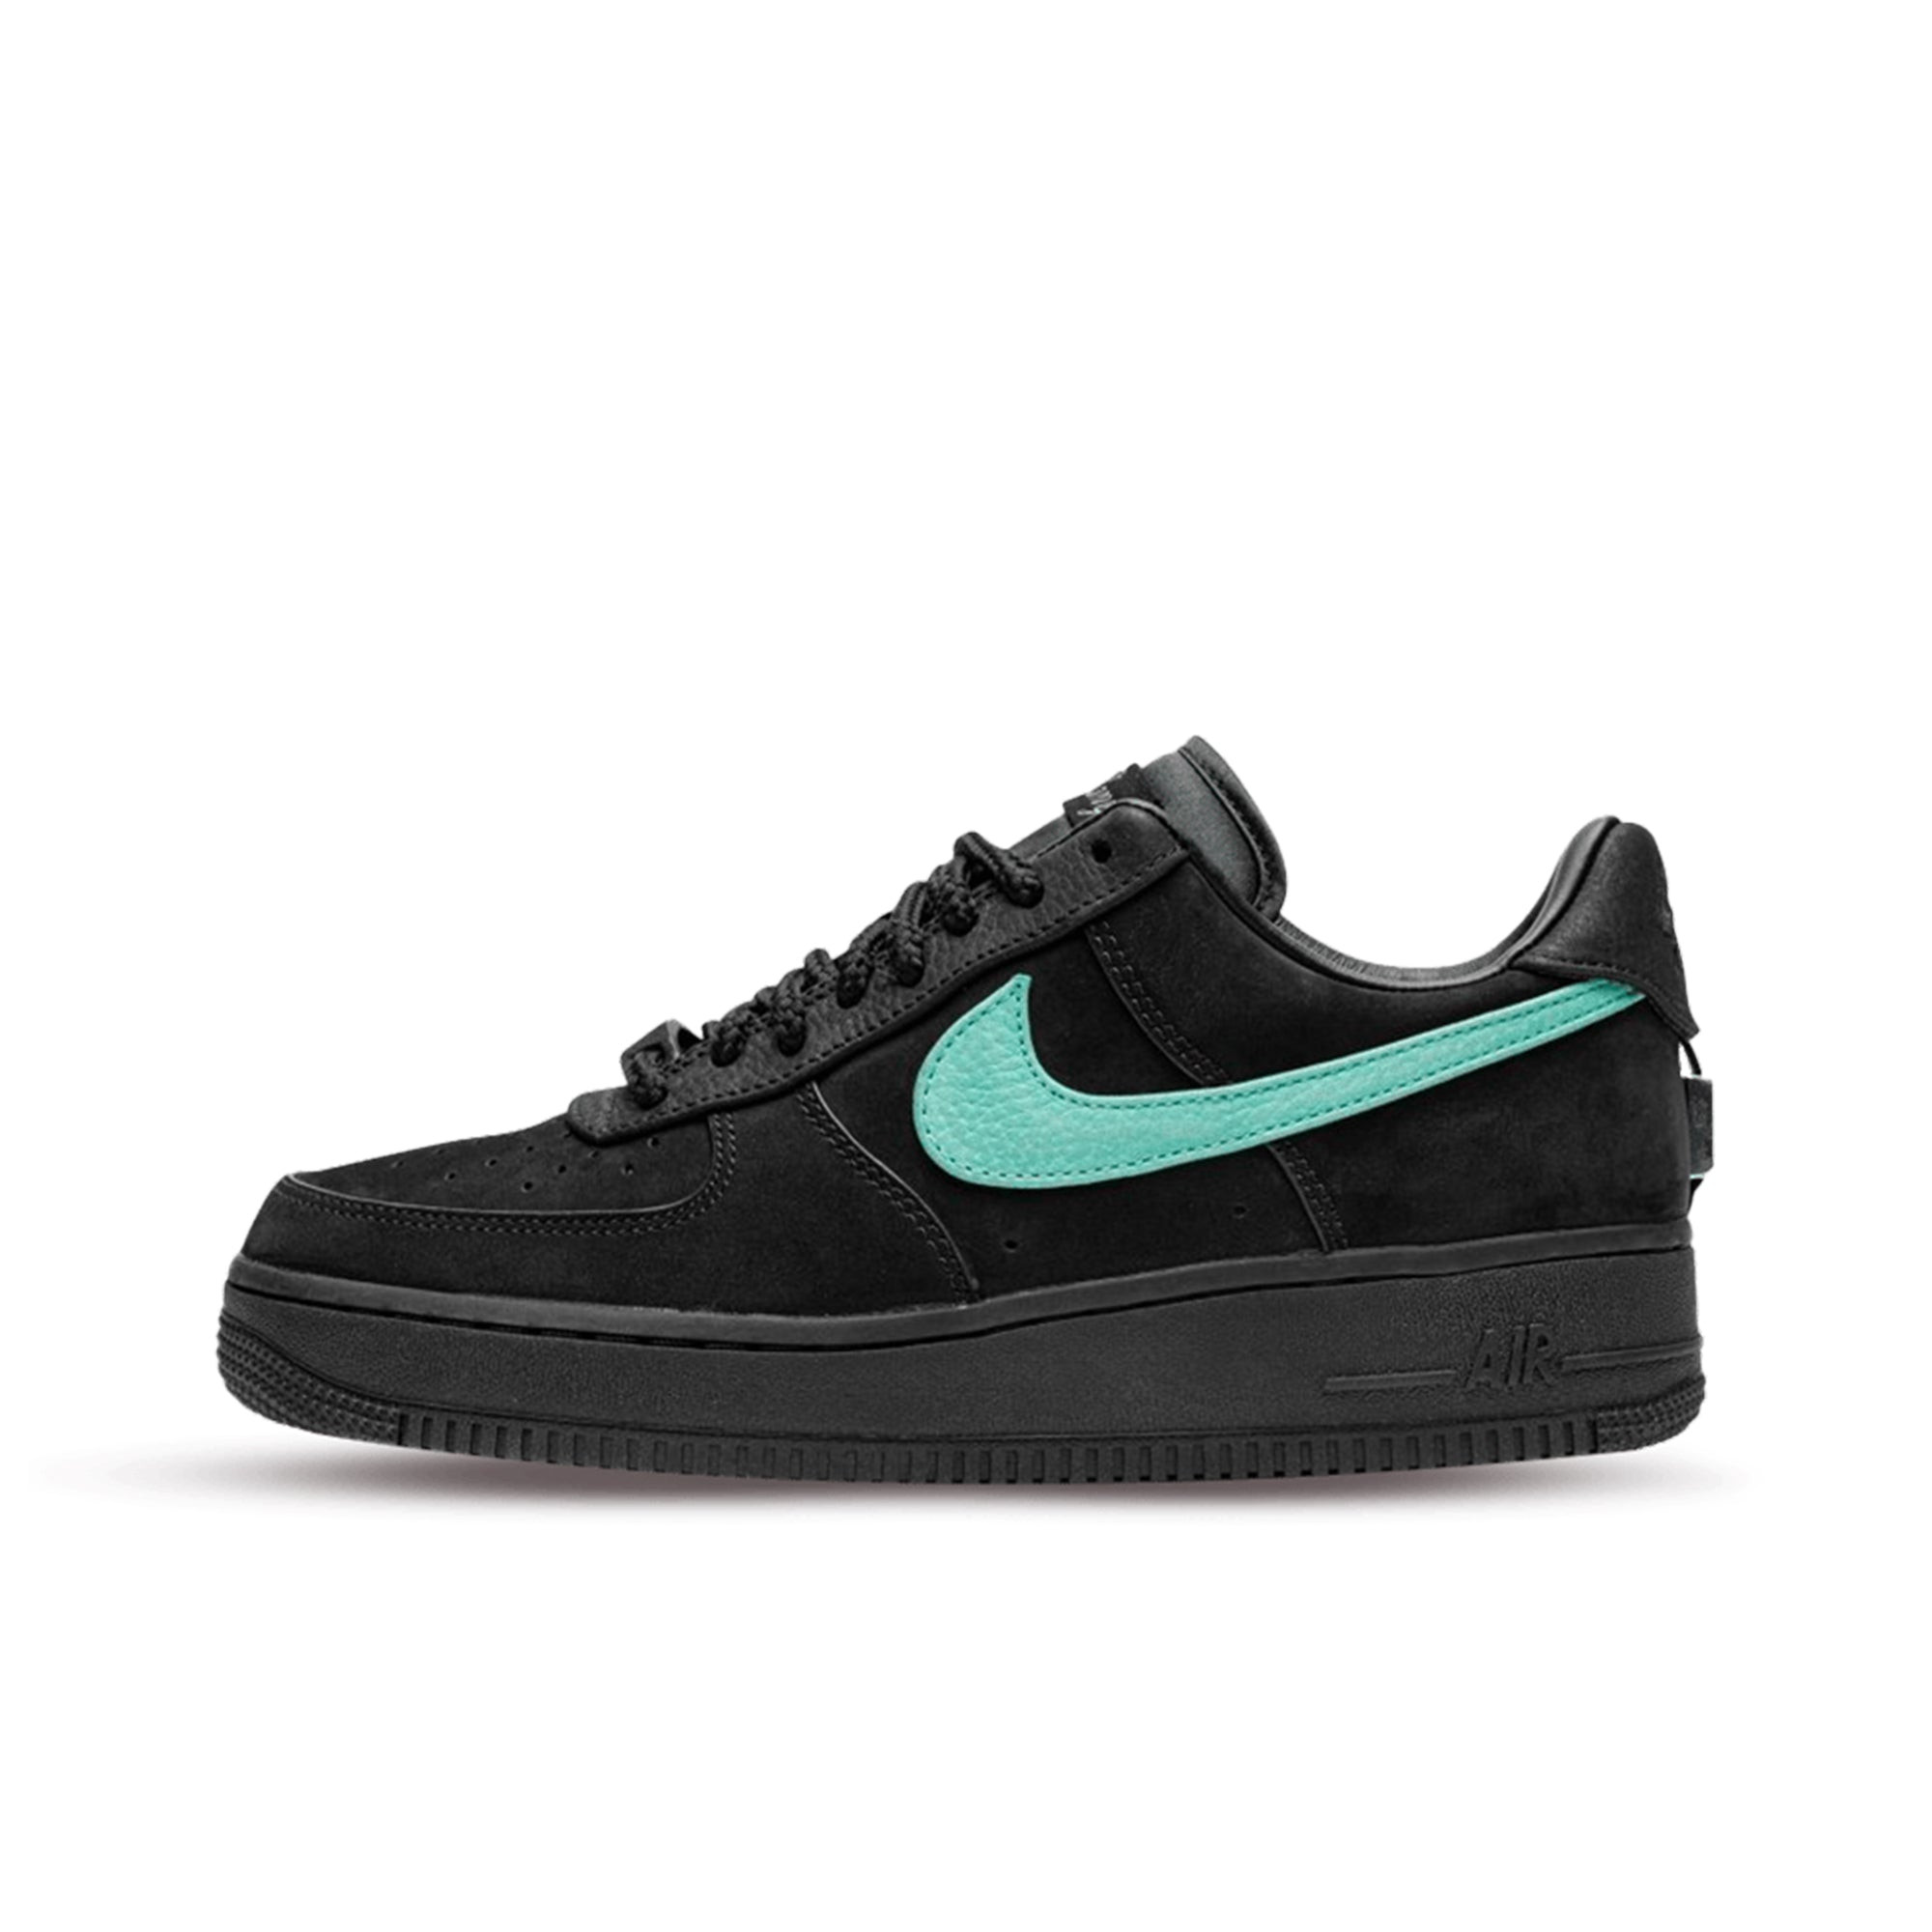 Afbeelding van Nike Air force 1 low sp x tiffany and co